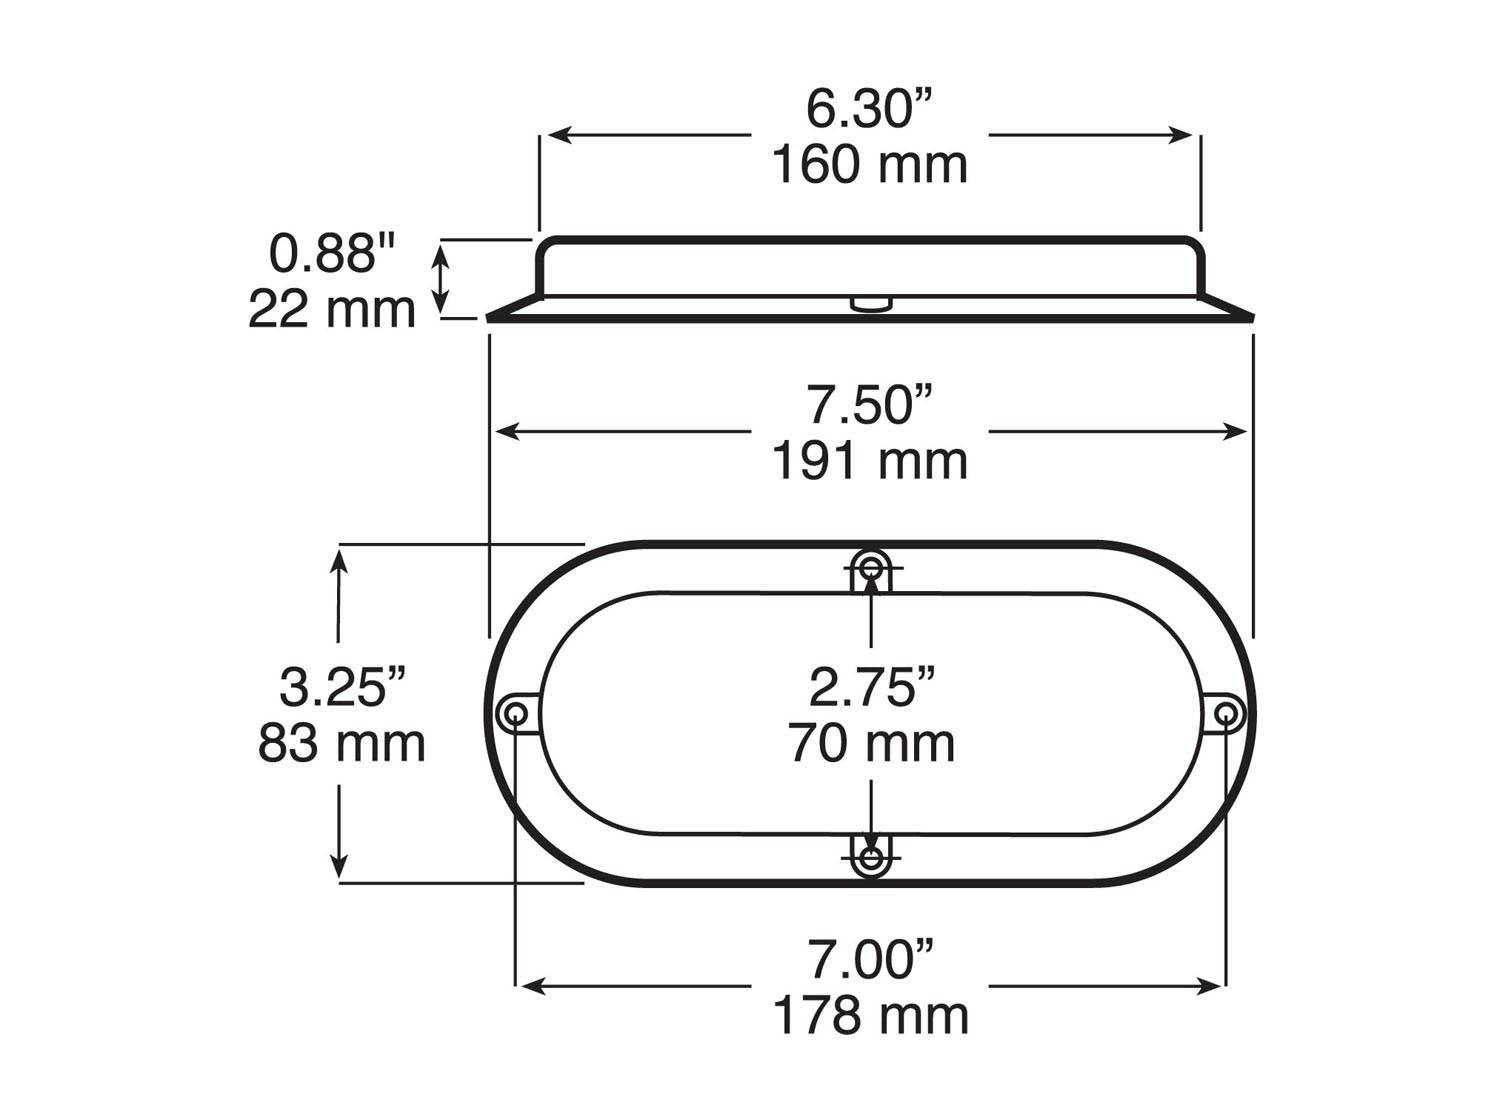 LED Stop/Turn/Tail, Combination Oval, Ece, w/ Clear Lens Surface-Mount, 7.5"X3.25" Multi-volt, amber + red, bulk pack (Pack of 50) - 423-4_line_dual_2view-BX5_0ab3e483-f464-4afa-a198-733d92f90c86